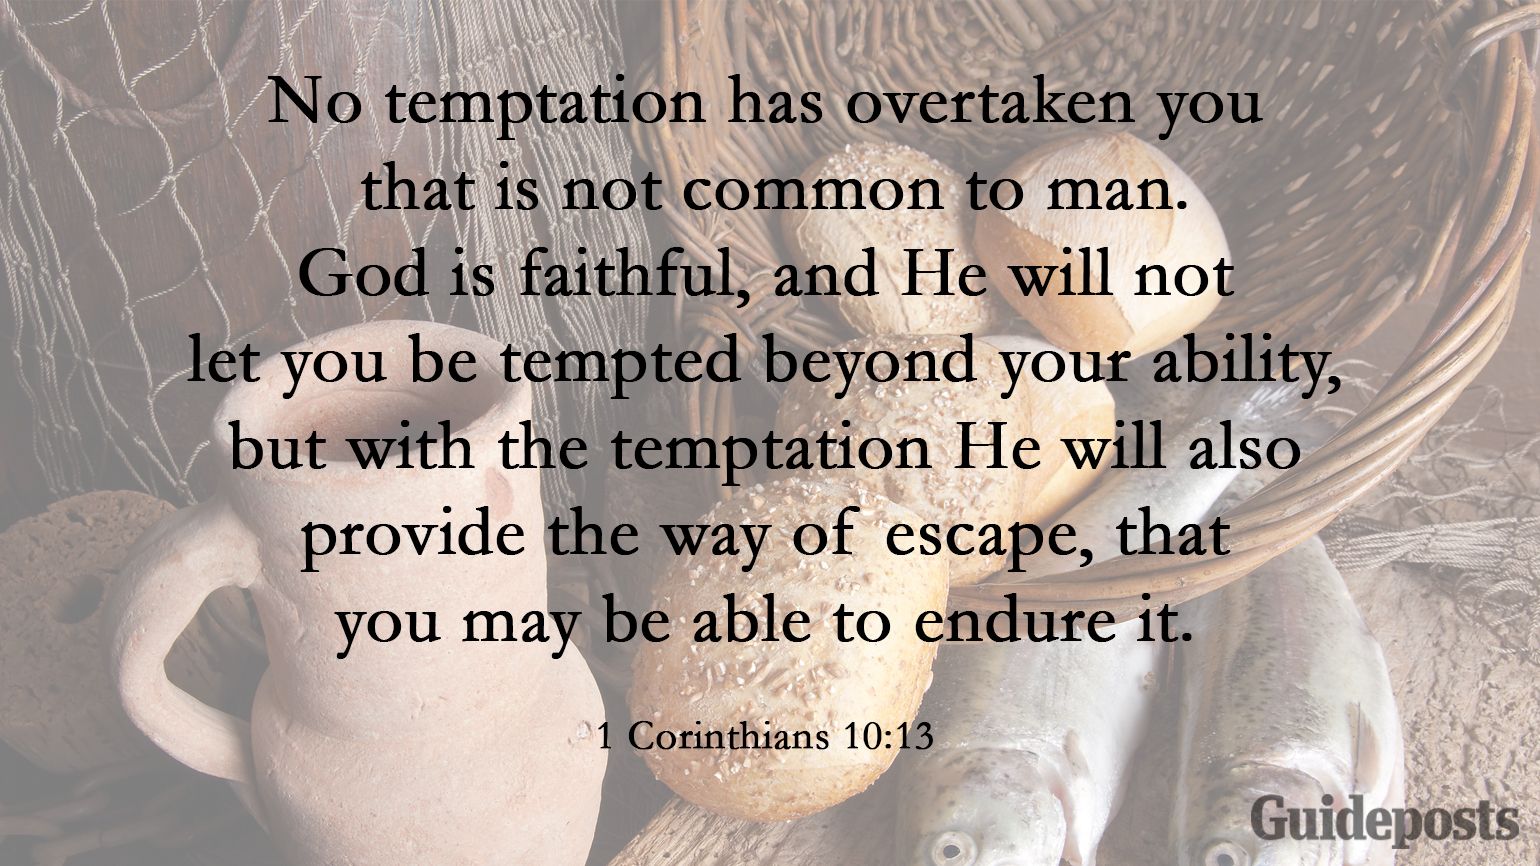 No temptation has overtaken you that is not common to man. God is faithful, and He will not let you be tempted beyond your ability, but with the temptation He will also provide the way of escape, that you may be able to endure it. 1 Corinthians 10:13